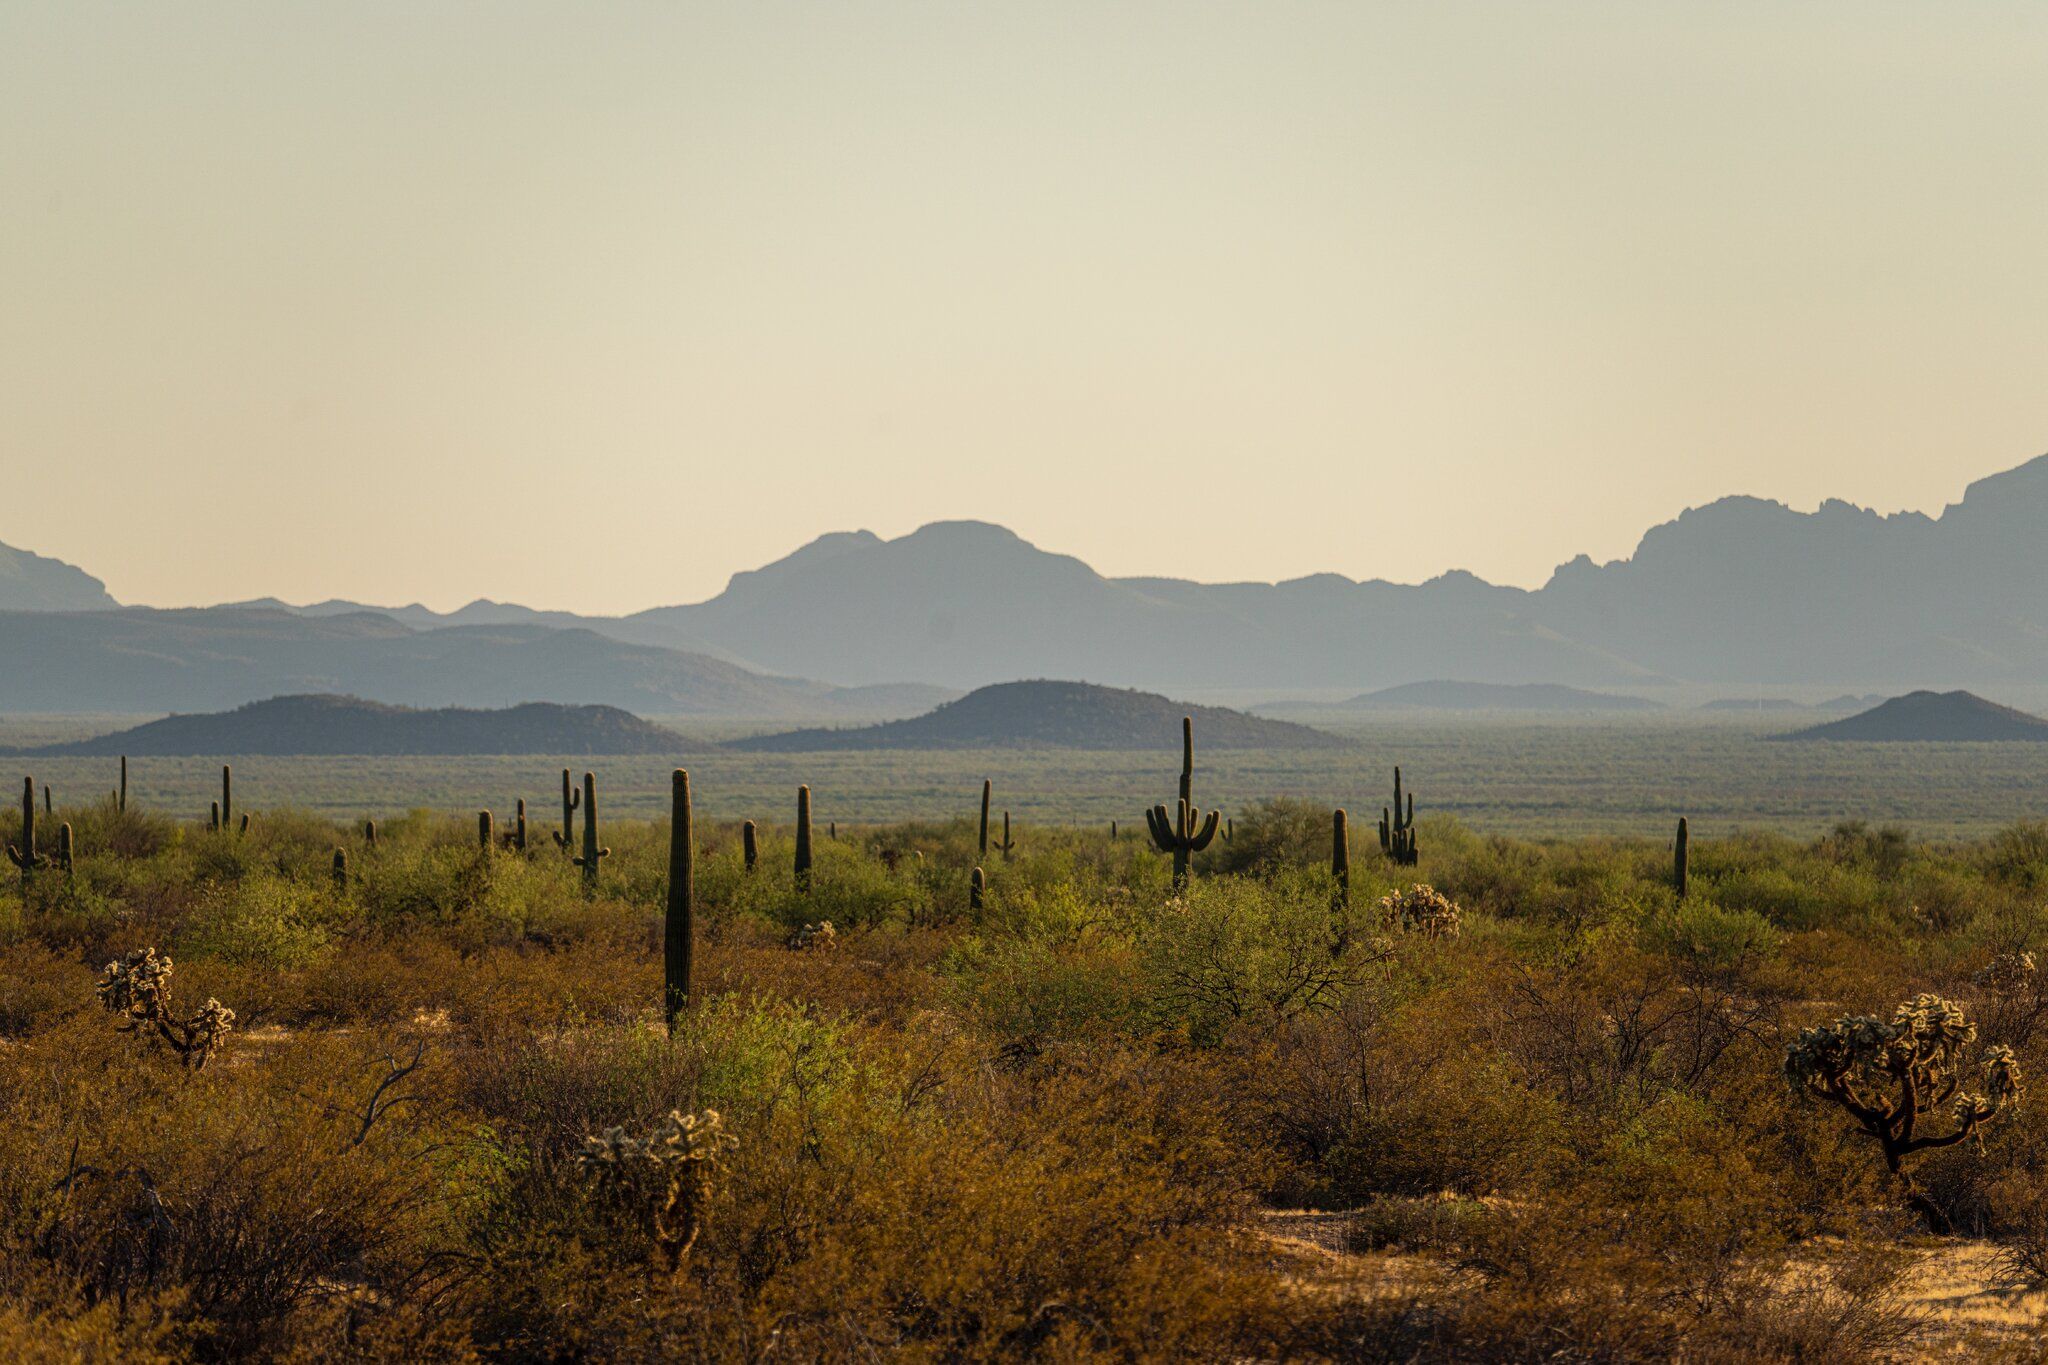 The Sonoran Desert in Arizona, where slightly less than half of all migrant deaths occur, trying to make their way to the United States. Image by Kevin Cooley/The New York Times. United States, undated. 